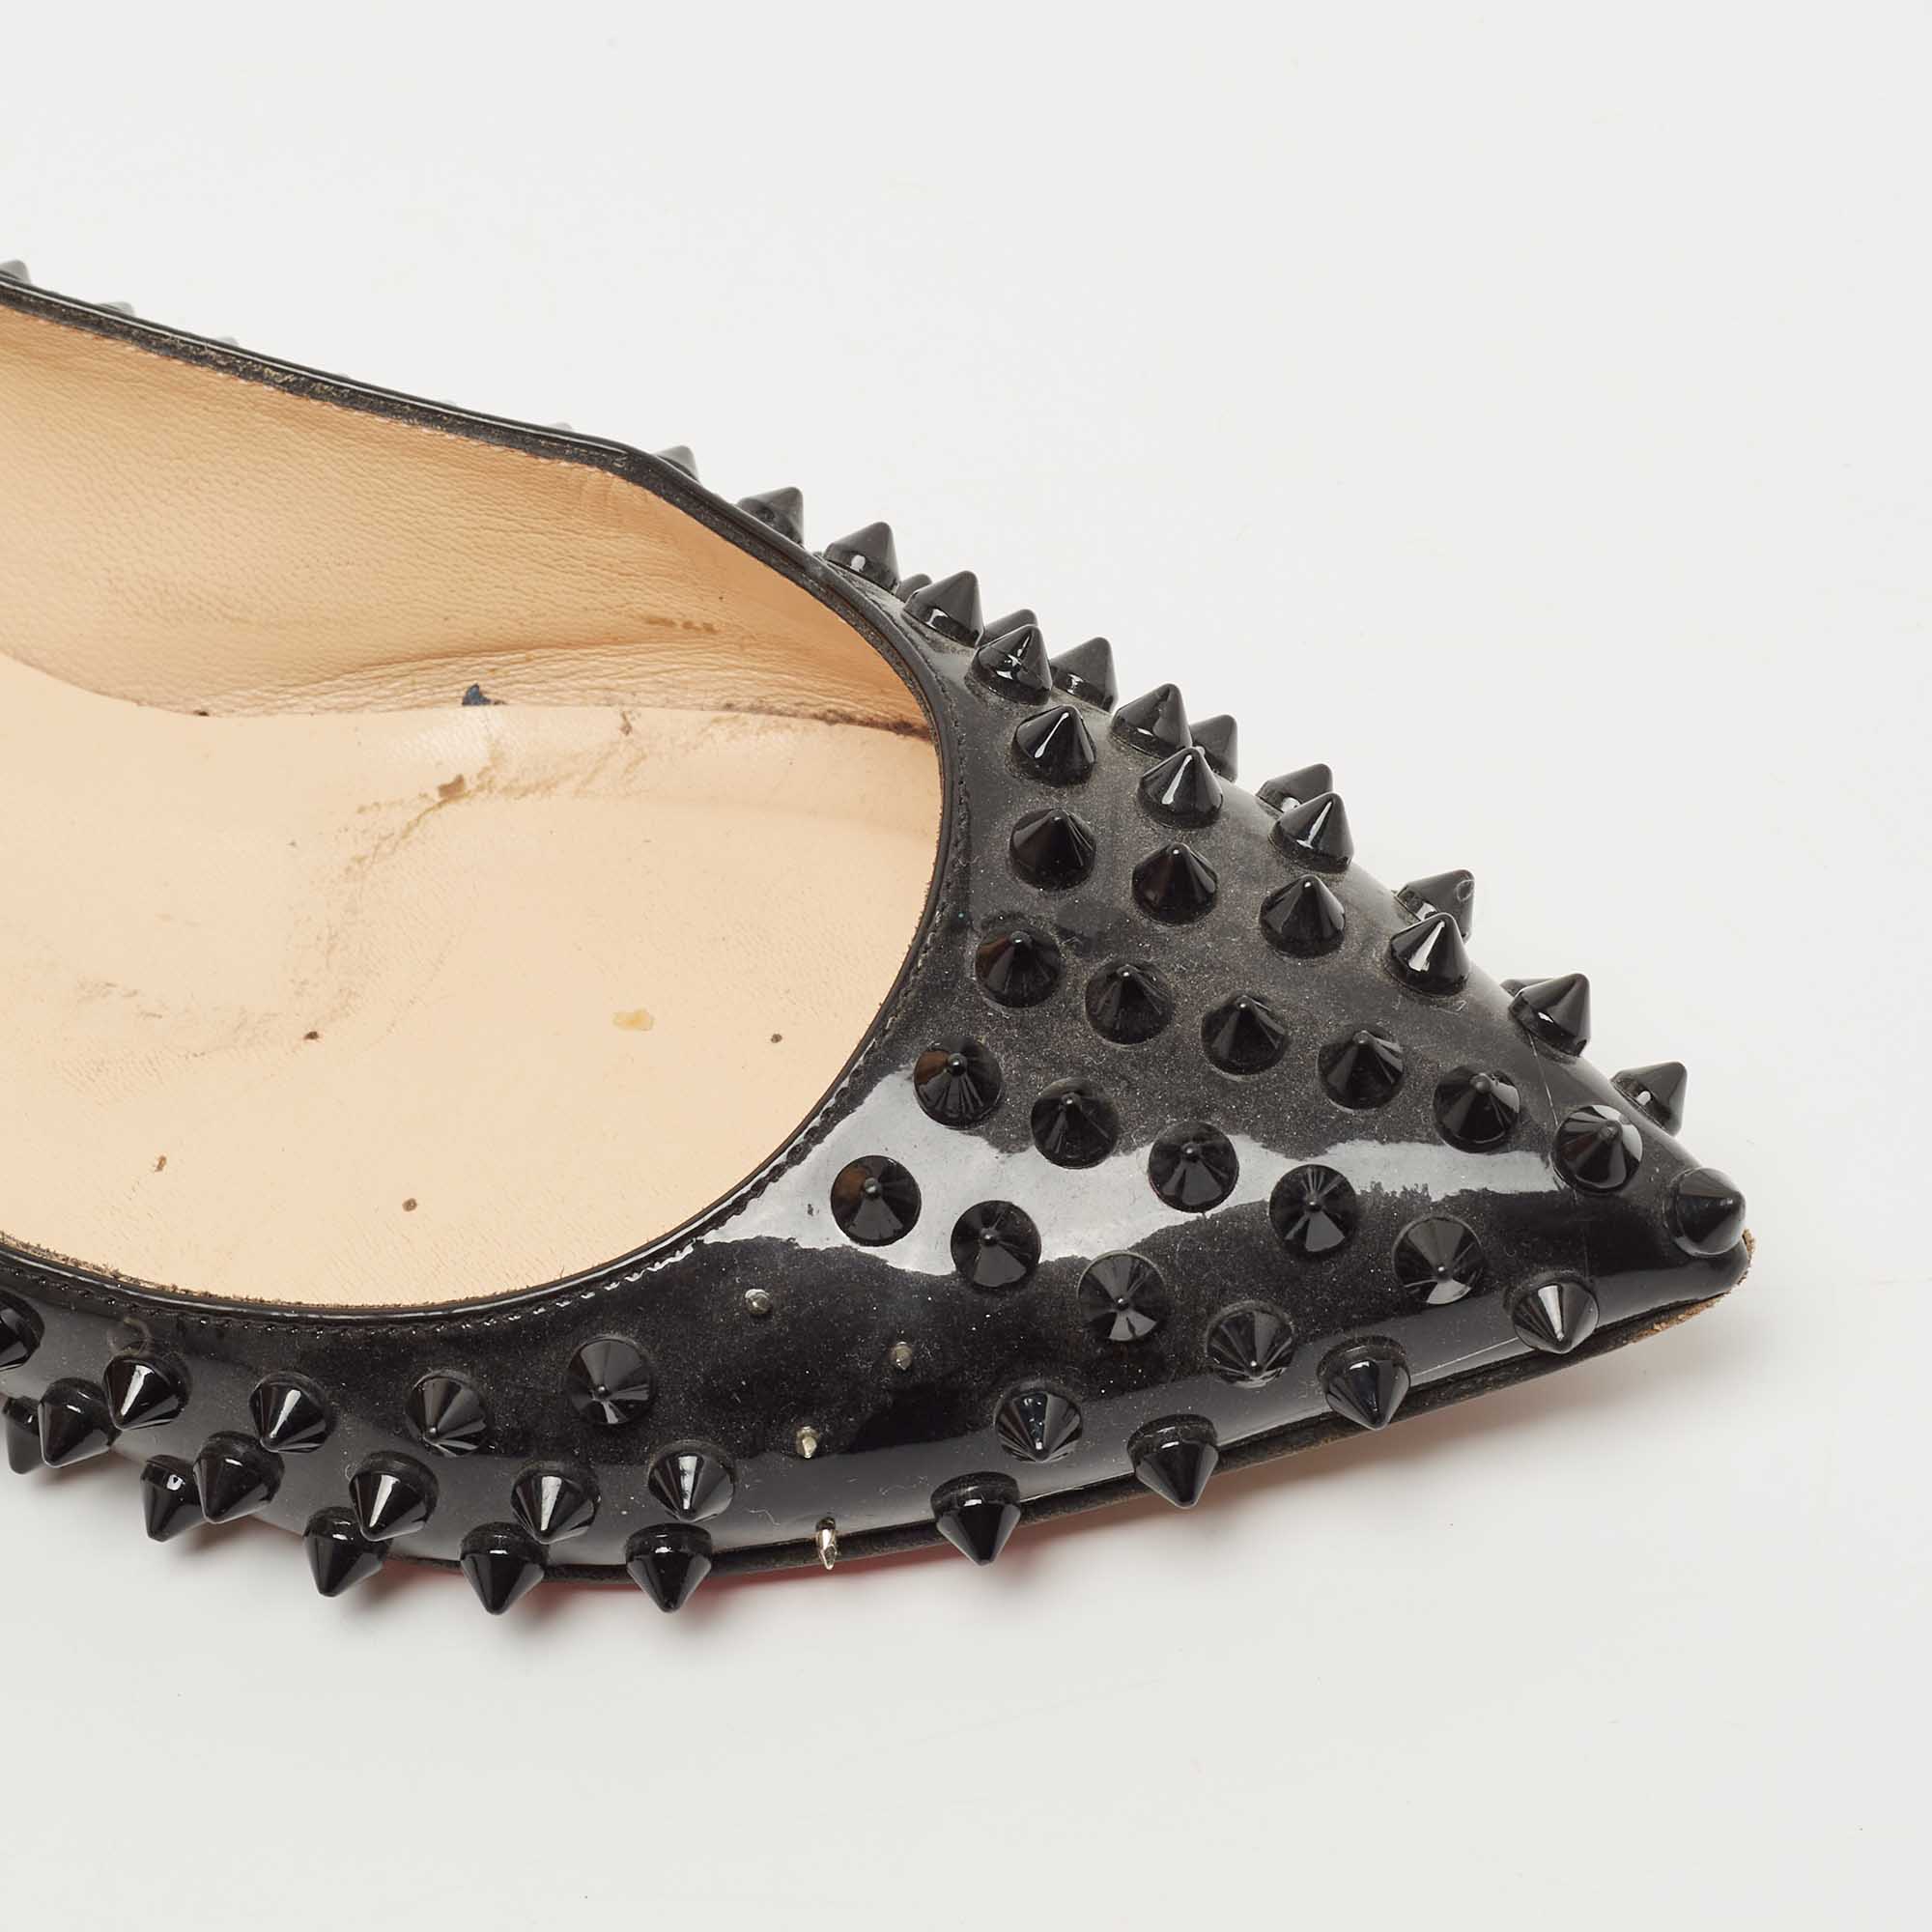 Christian Louboutin Black Patent Leather Pigalle Spikes Ballet Flats Size 37